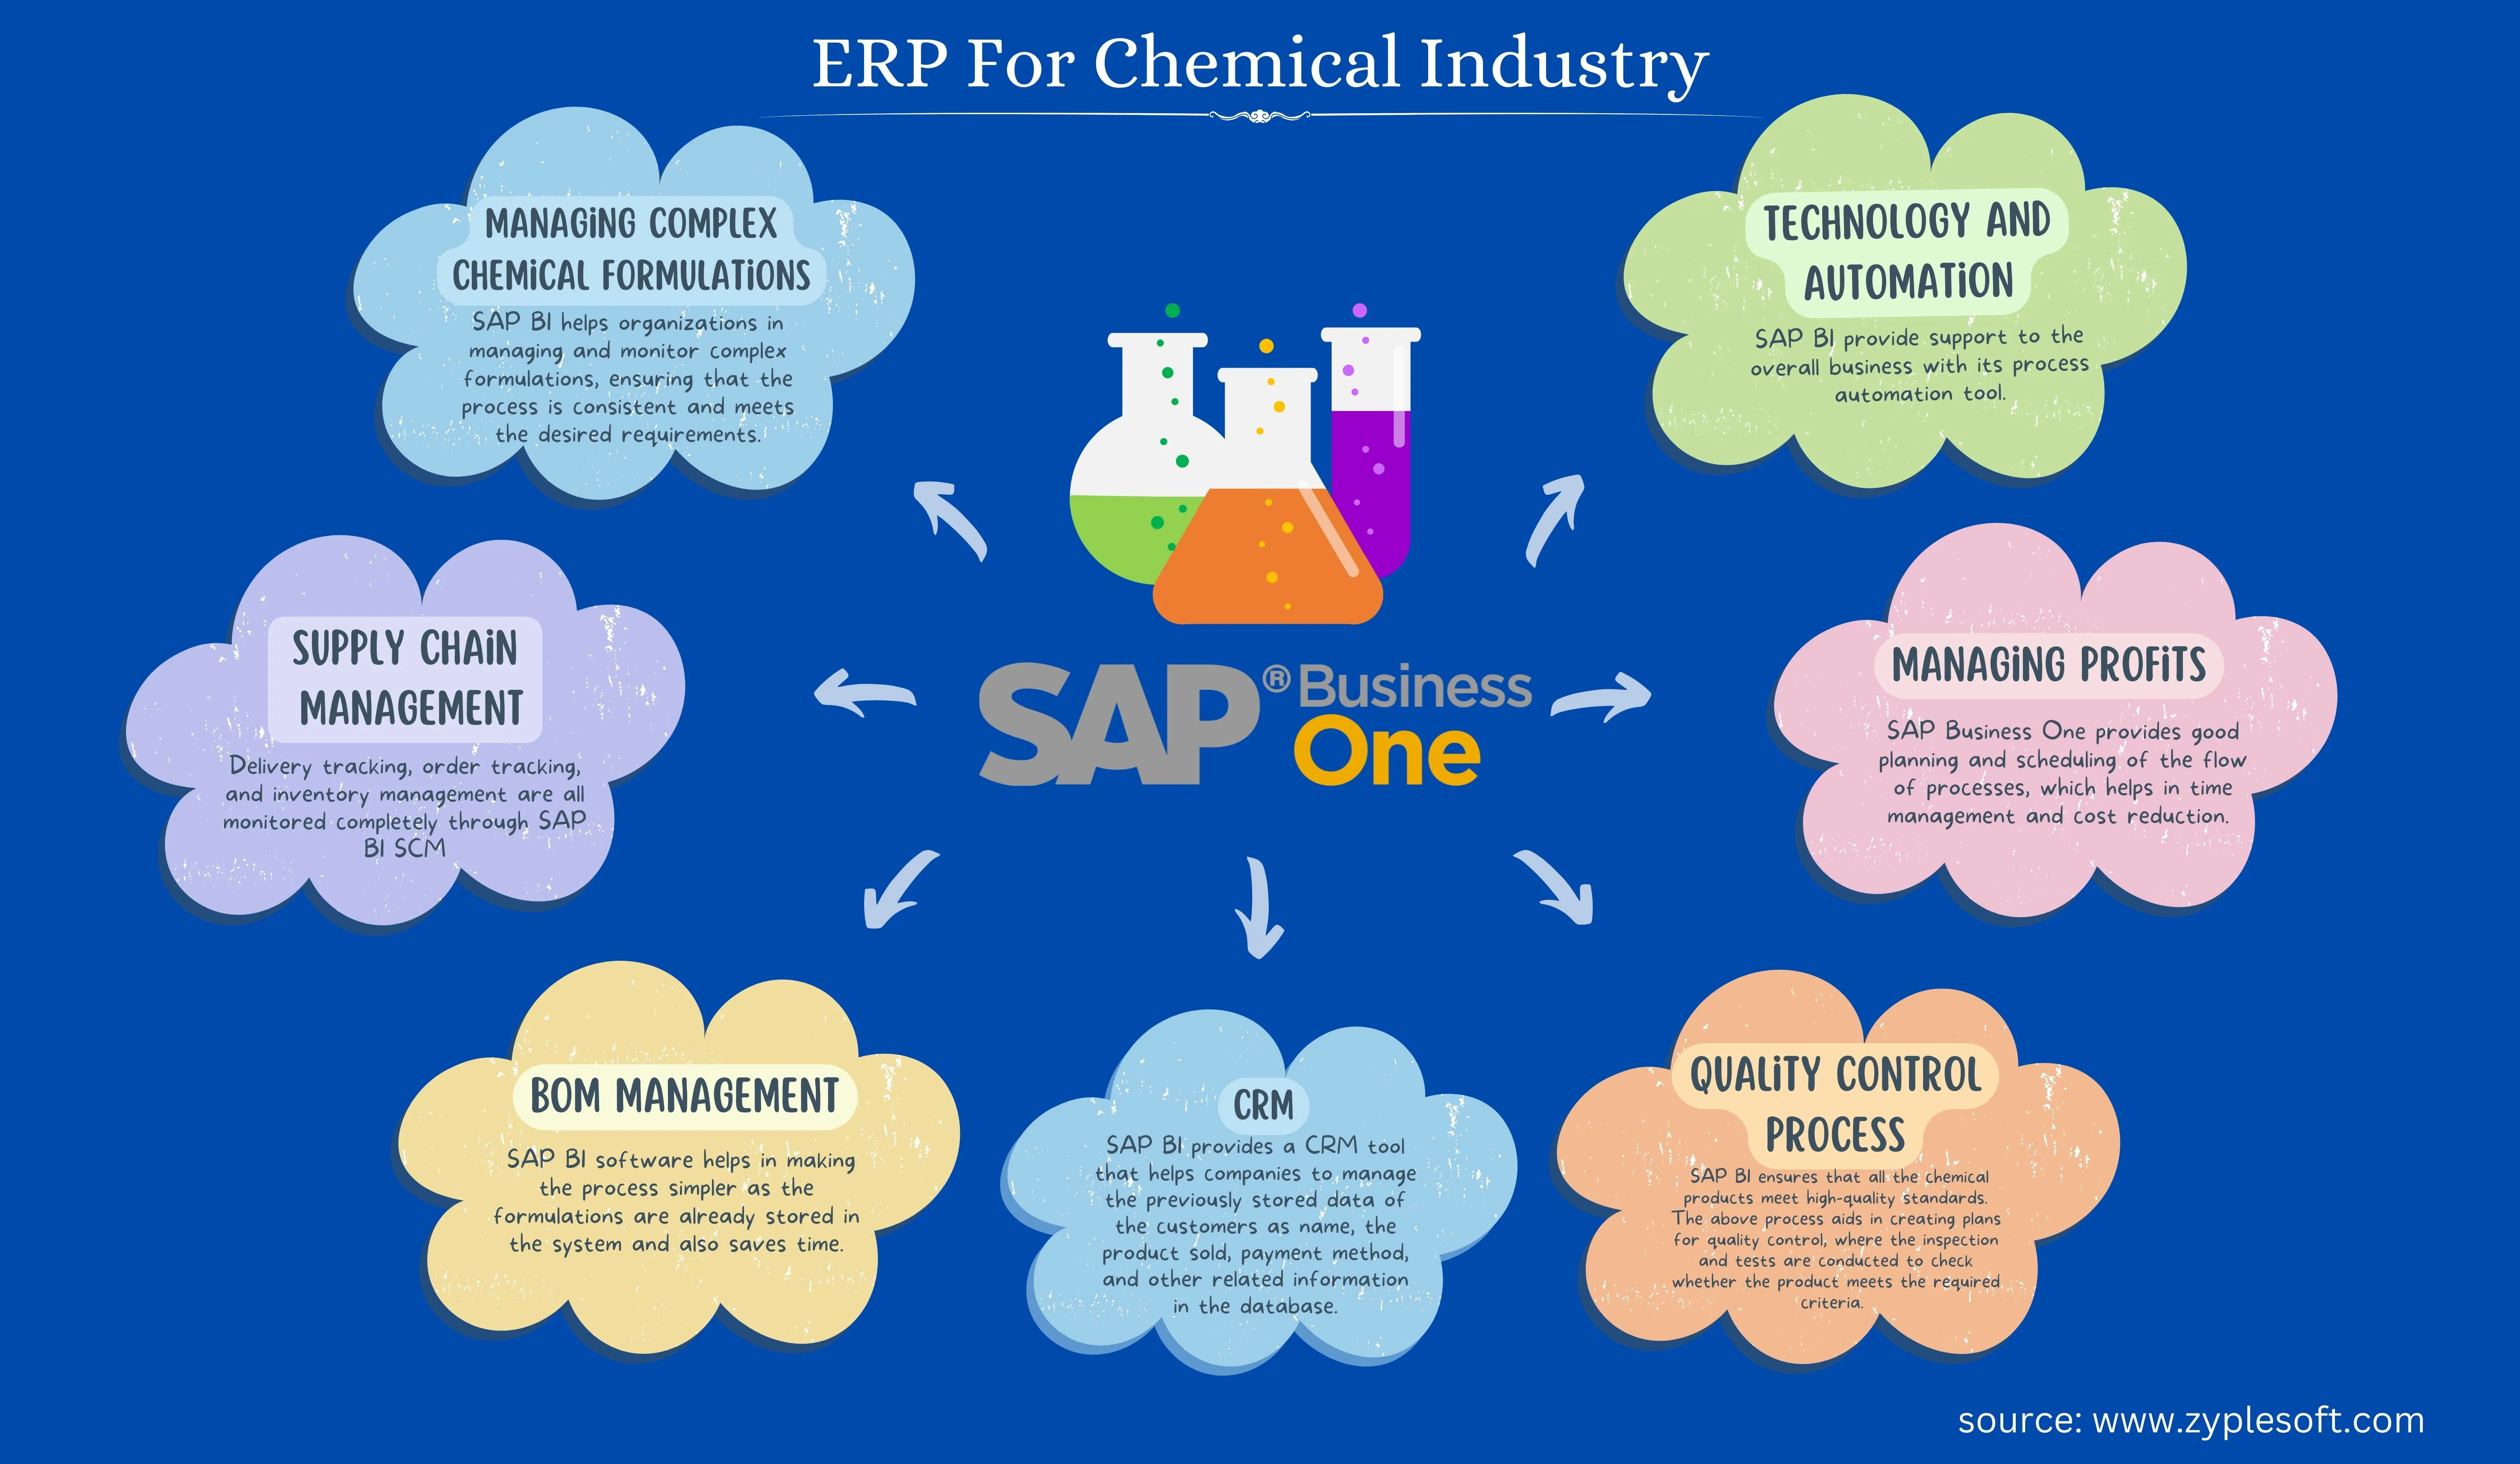 SAP Business One ERP for Chemical Industry